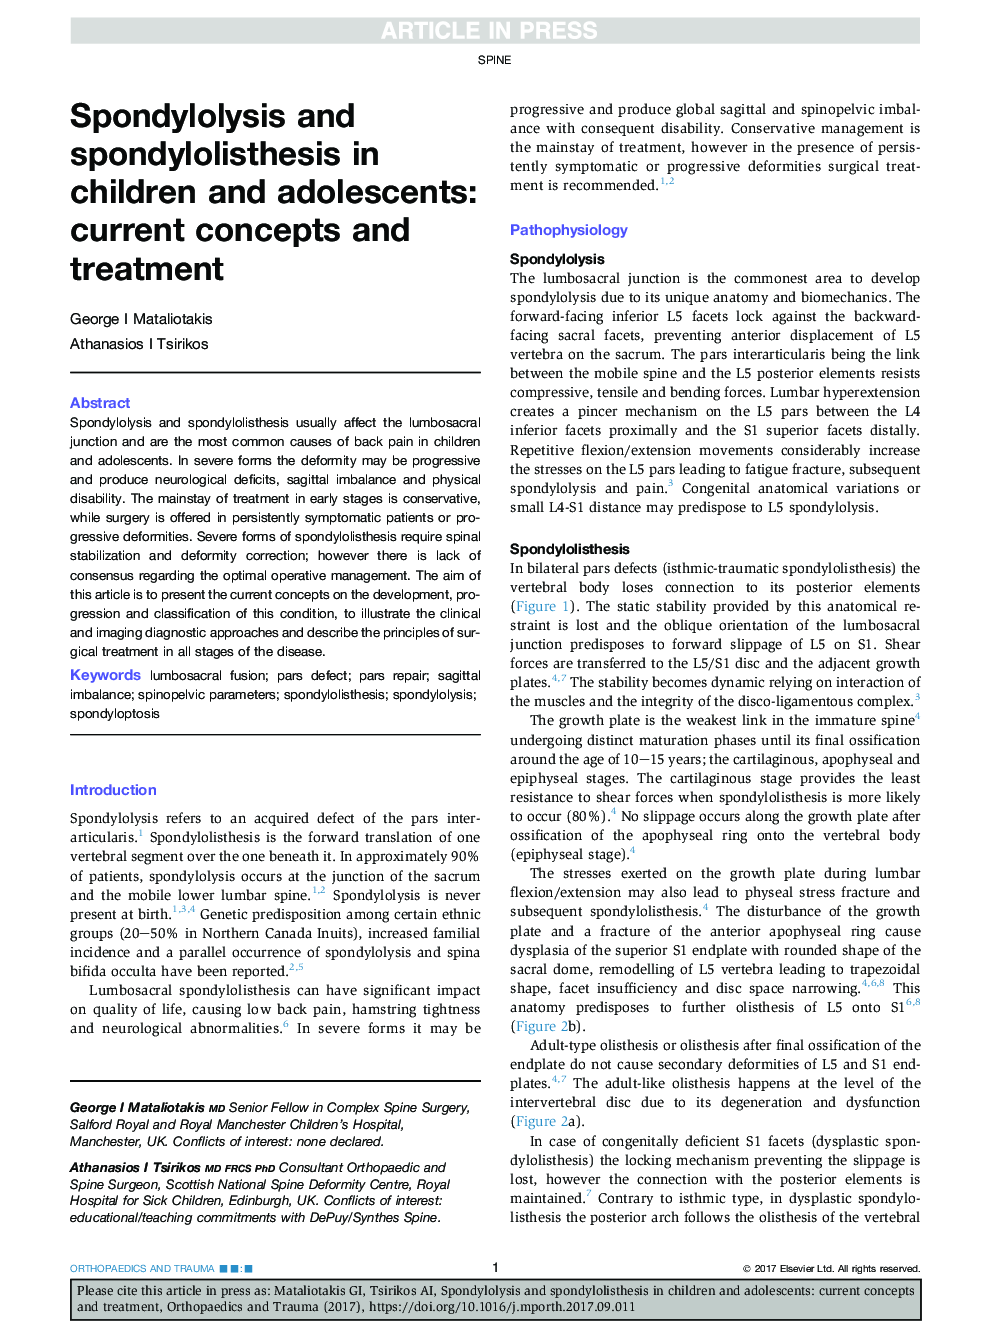 Spondylolysis and spondylolisthesis in children and adolescents: current concepts and treatment